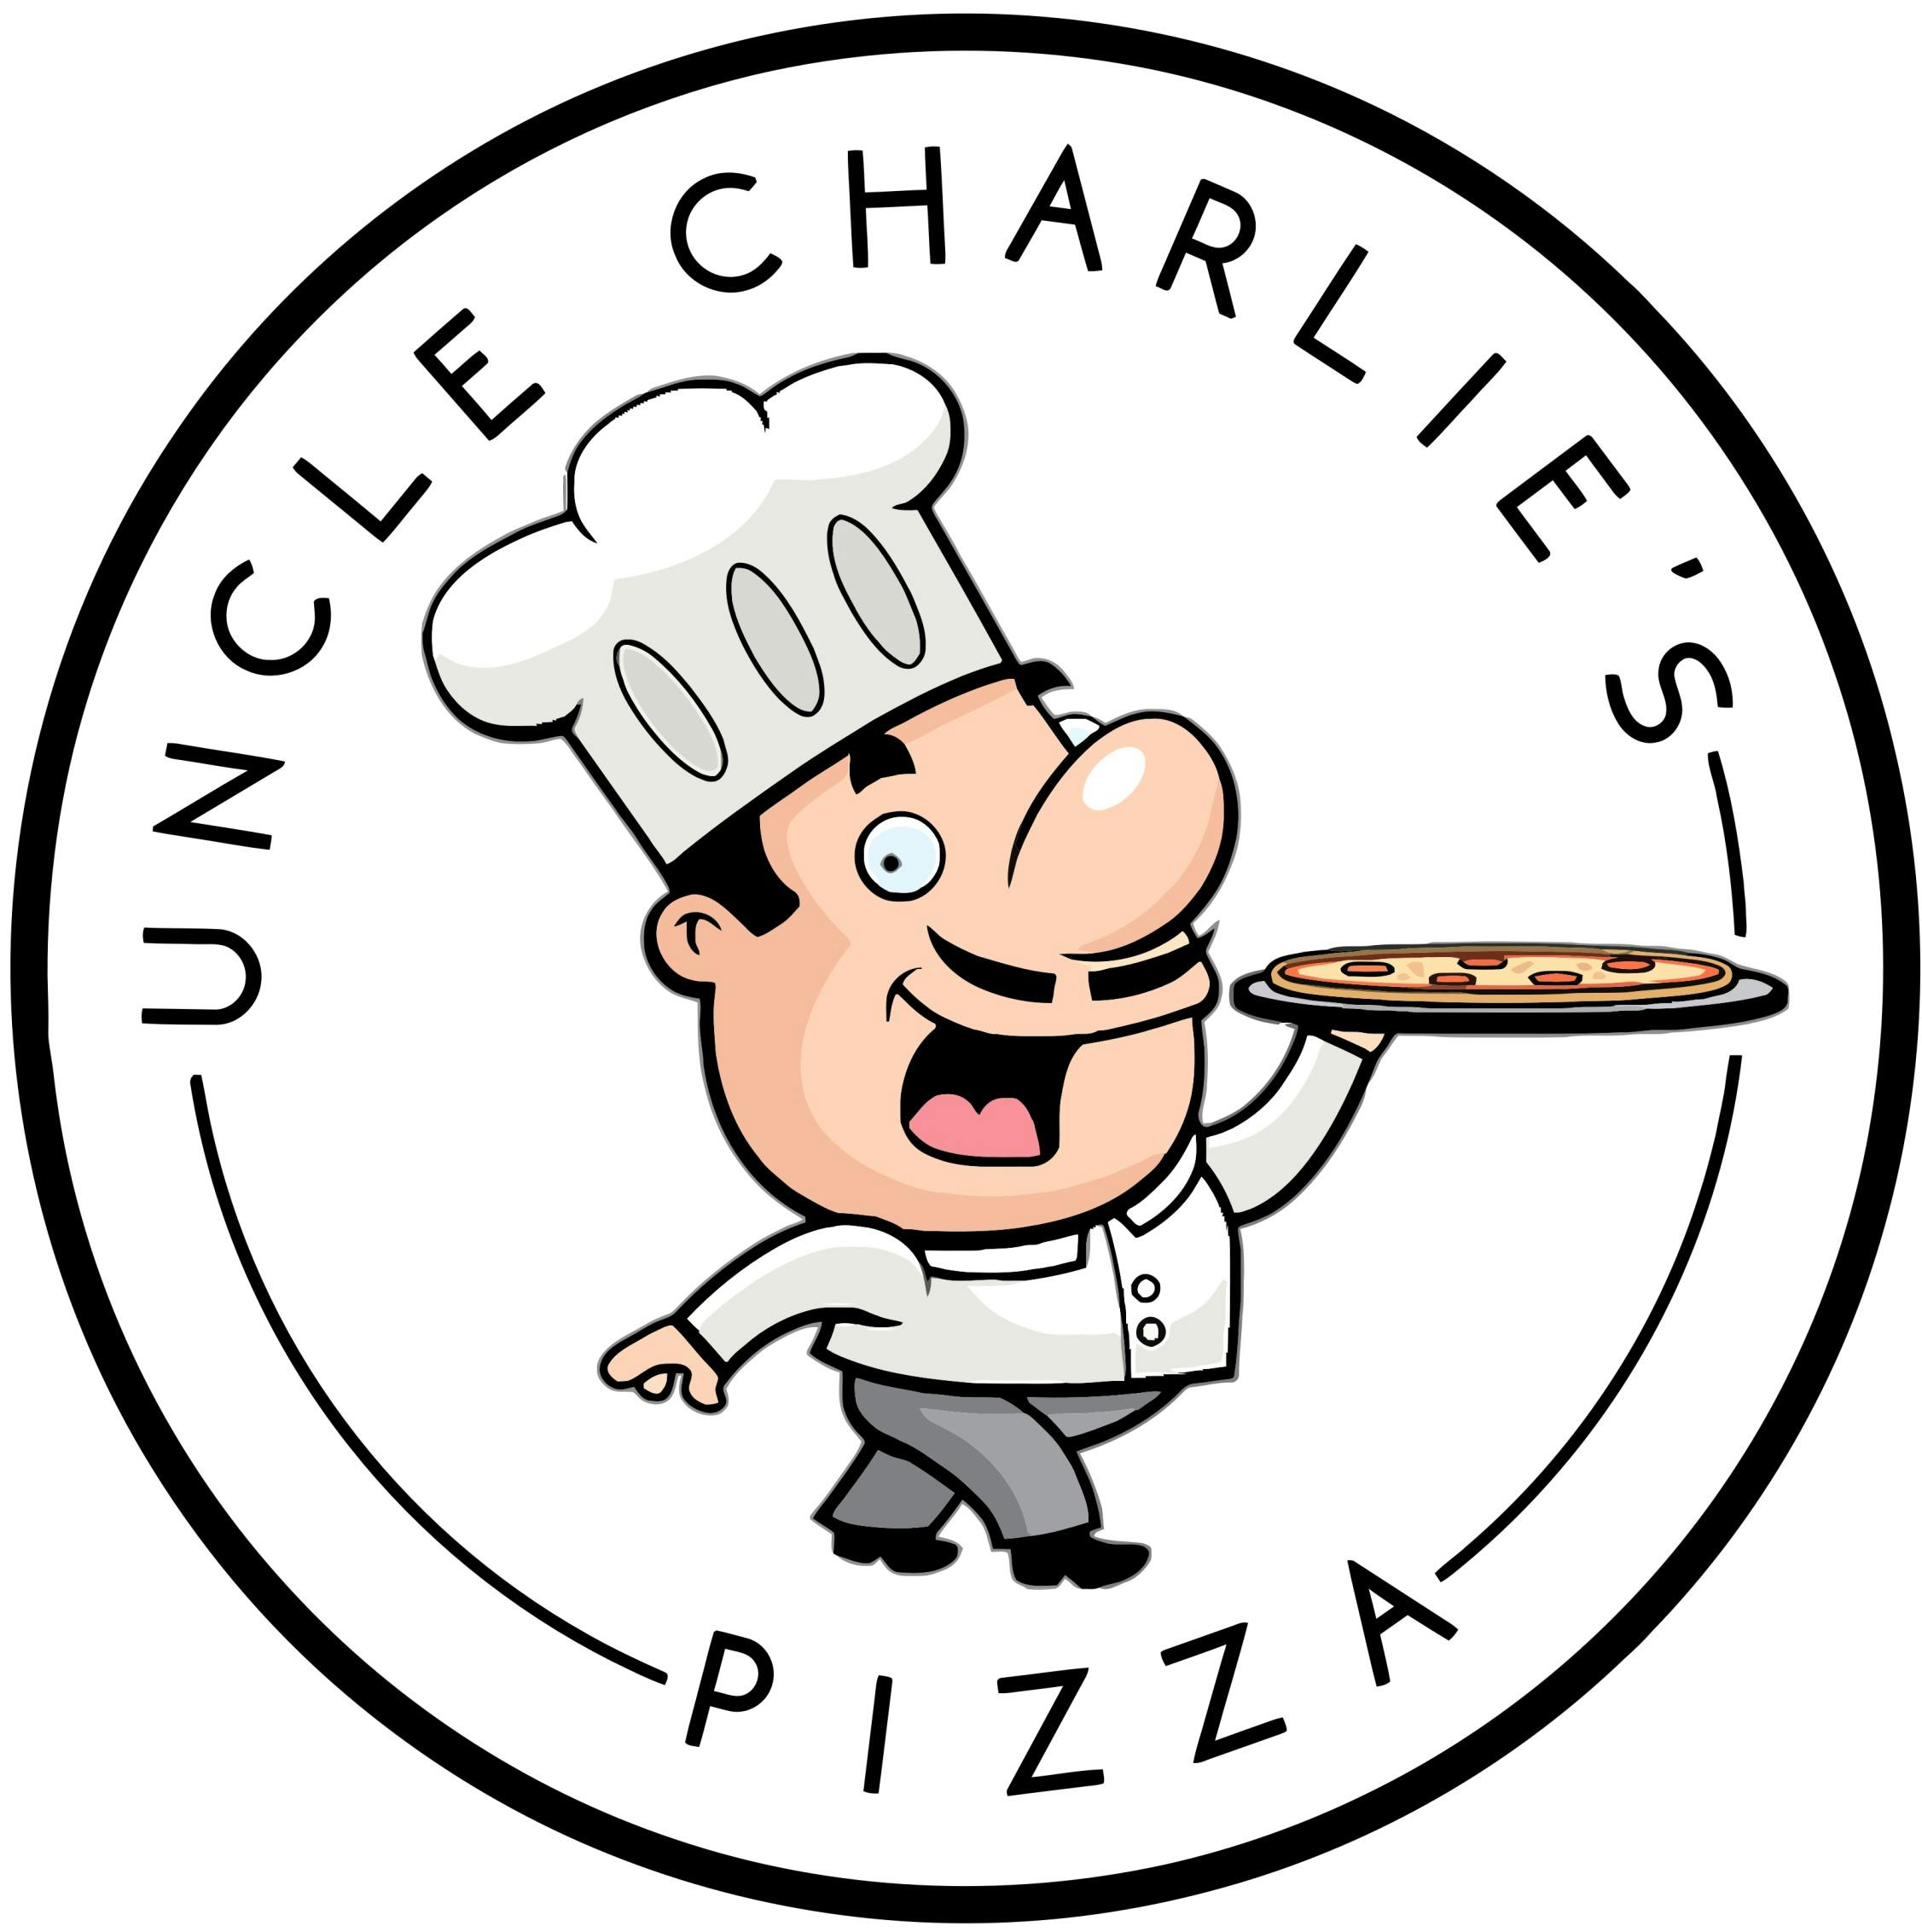 Uncle Charlie's Pizza